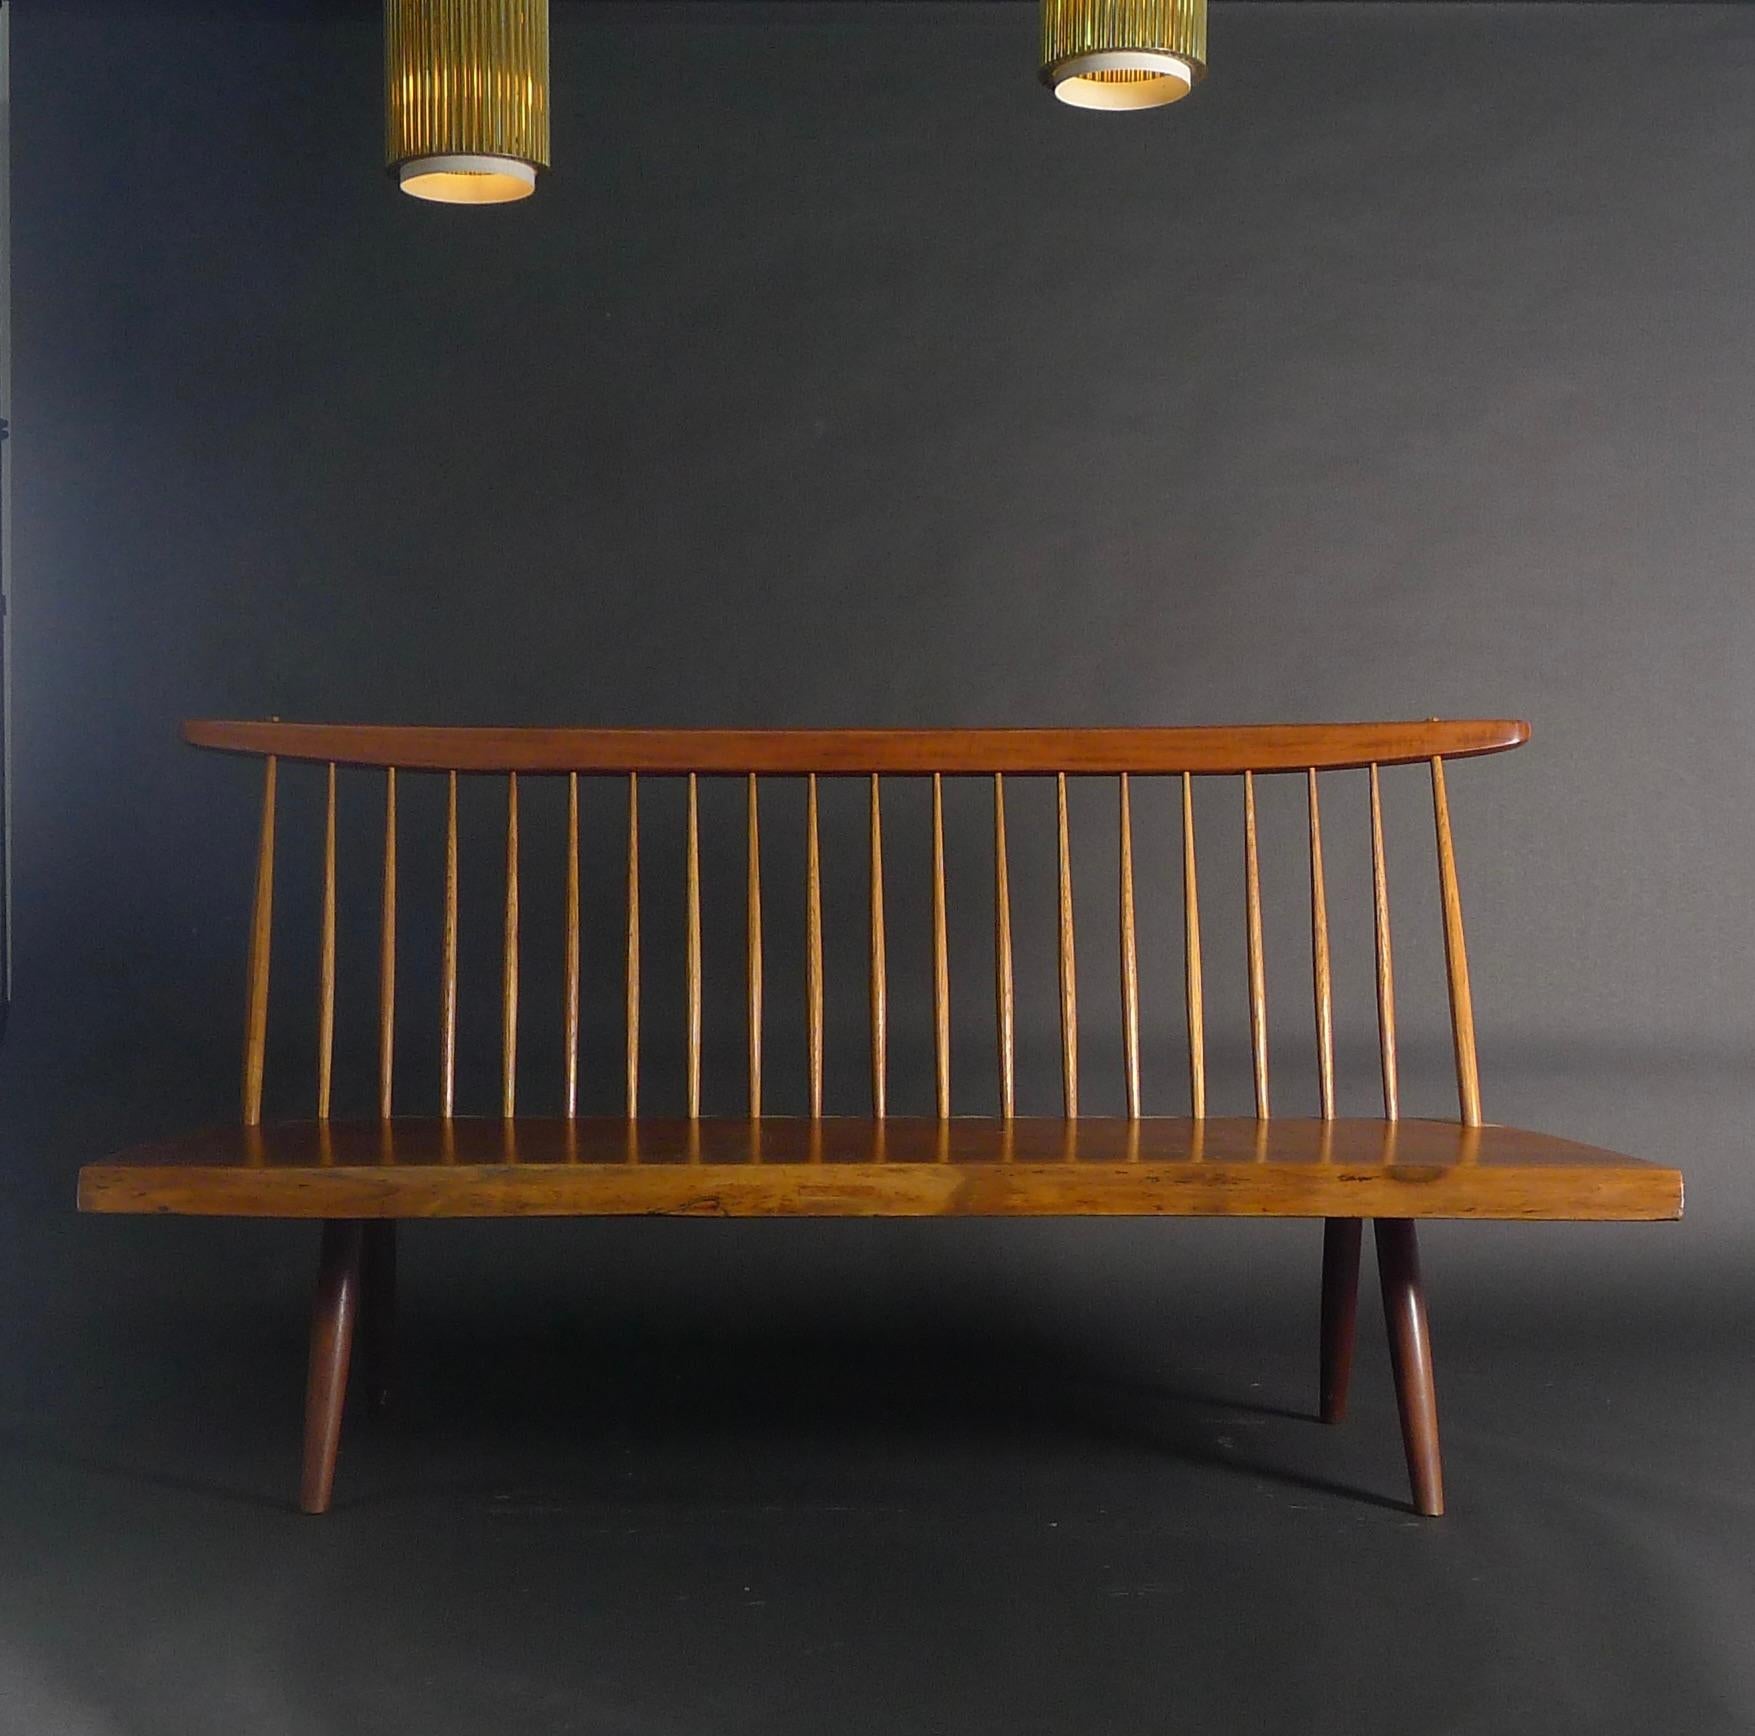 George Nakashima bench, created 1972, carved from a single slab of American black walnut with freeform front edge,  and with turned hickory spindles to the back

82cm high, 158cm wide, 70cm deep, seat height 36cm

with copy of original order card